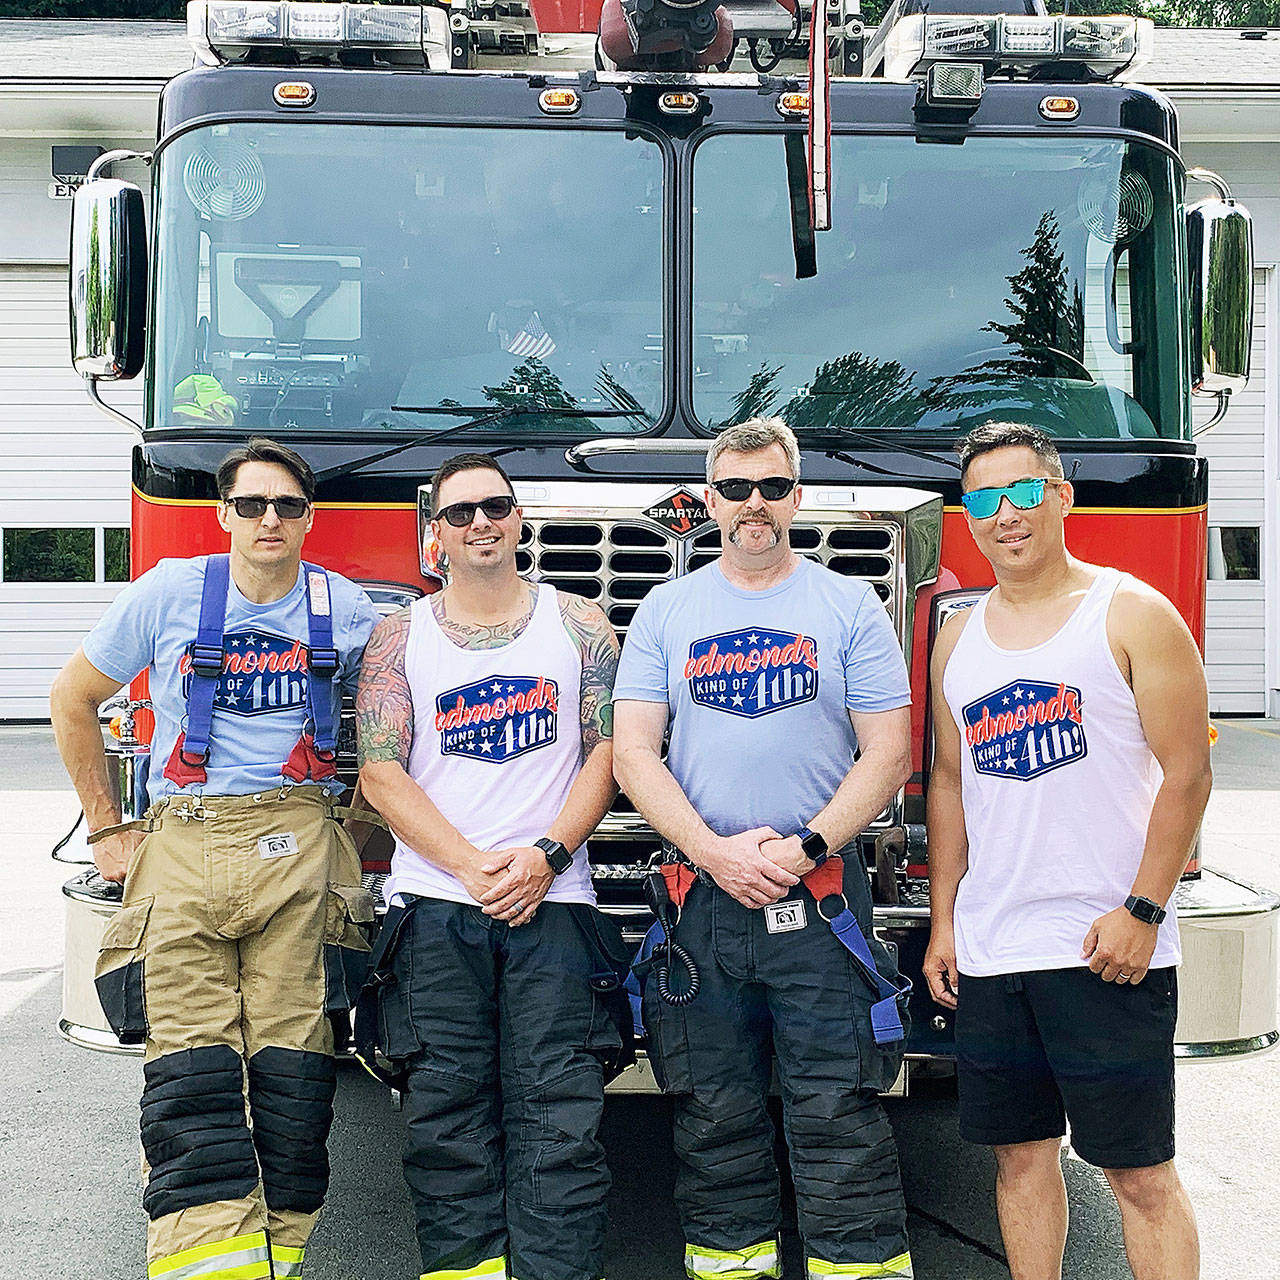 From left, Cabot Guidry, firefighter EMT, Justin Pickens, firefighter paramedic, the Capt. Keith Sessions, all of South County’s Edmonds Esperance Fire Station 20, with restaurant owner Shubert Ho.                                Submitted photo